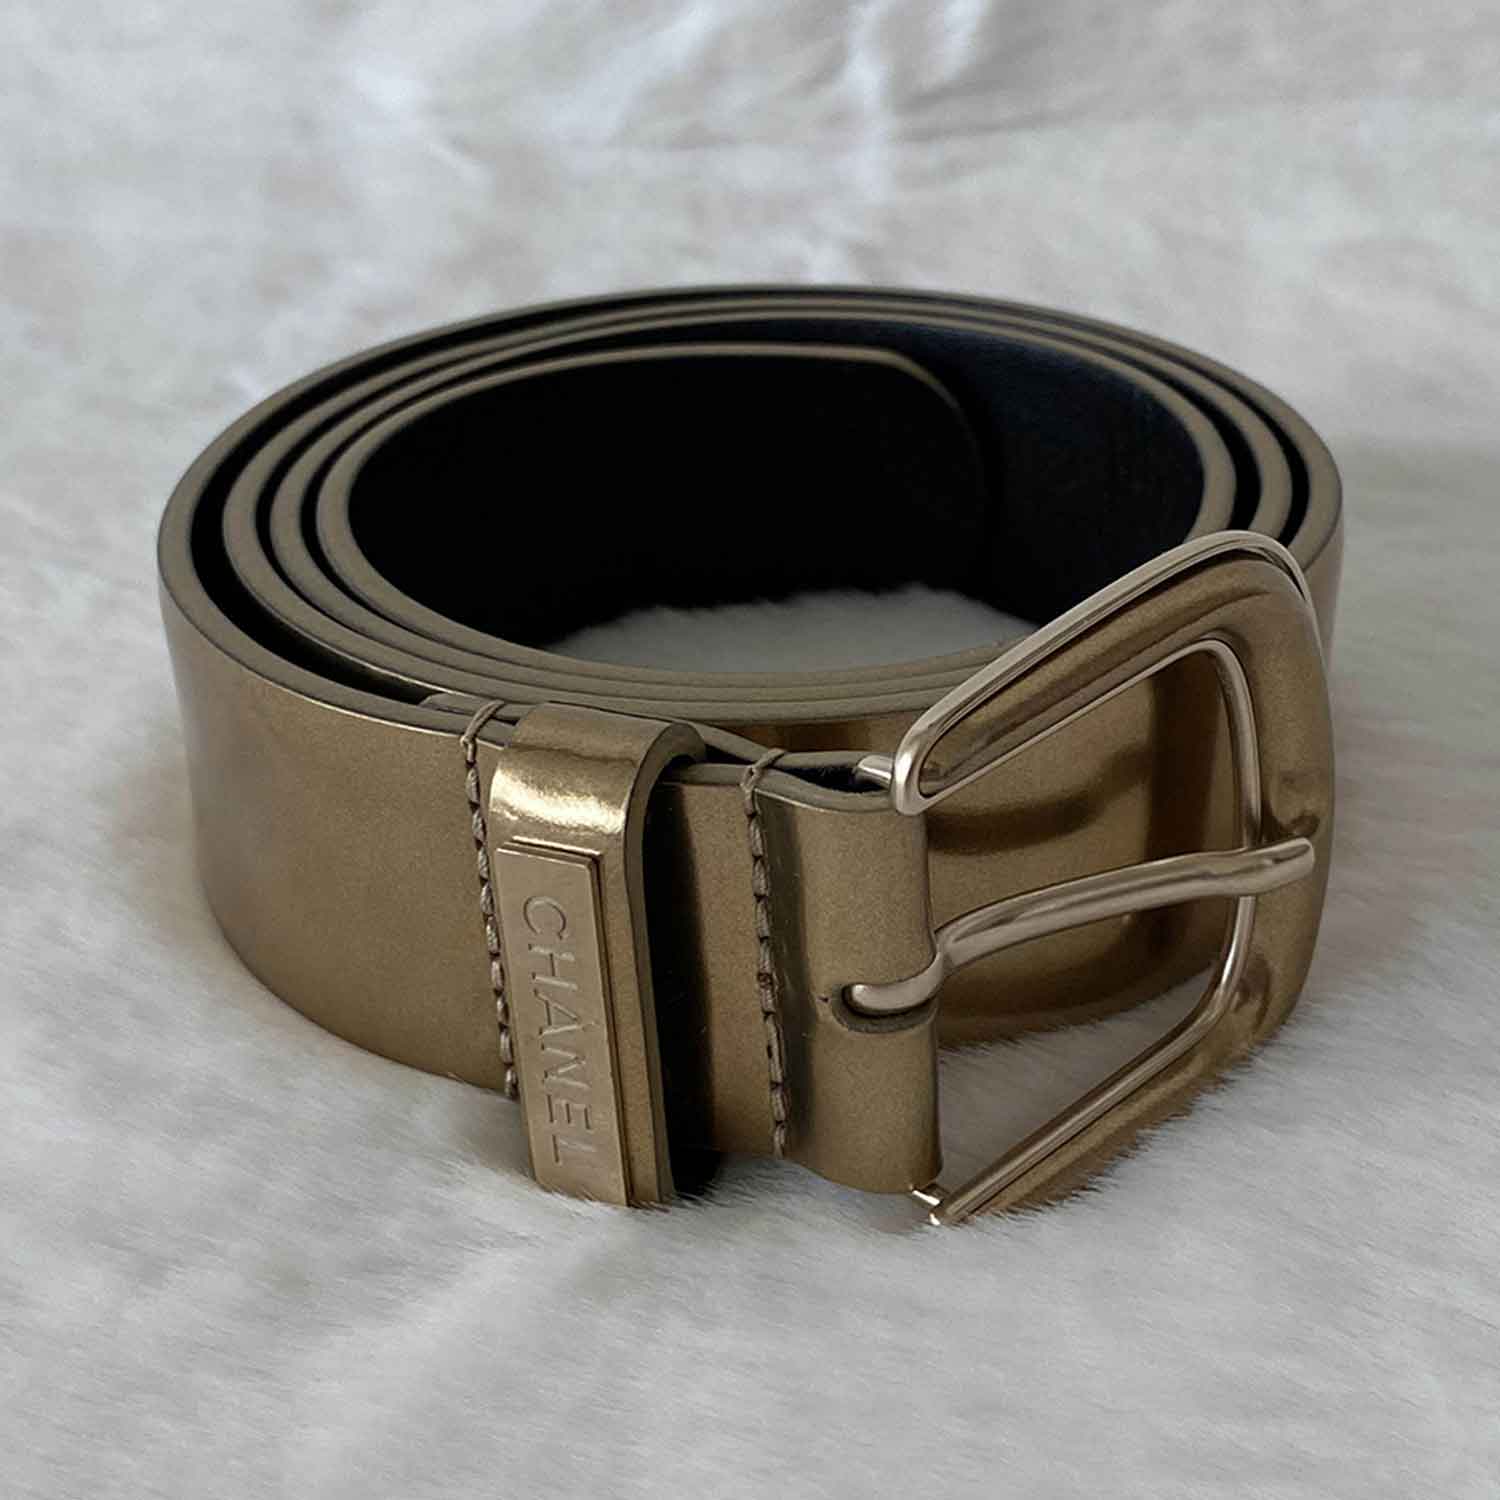 Shop authentic Chanel Metallic Gold Leather Belt at revogue for just ...